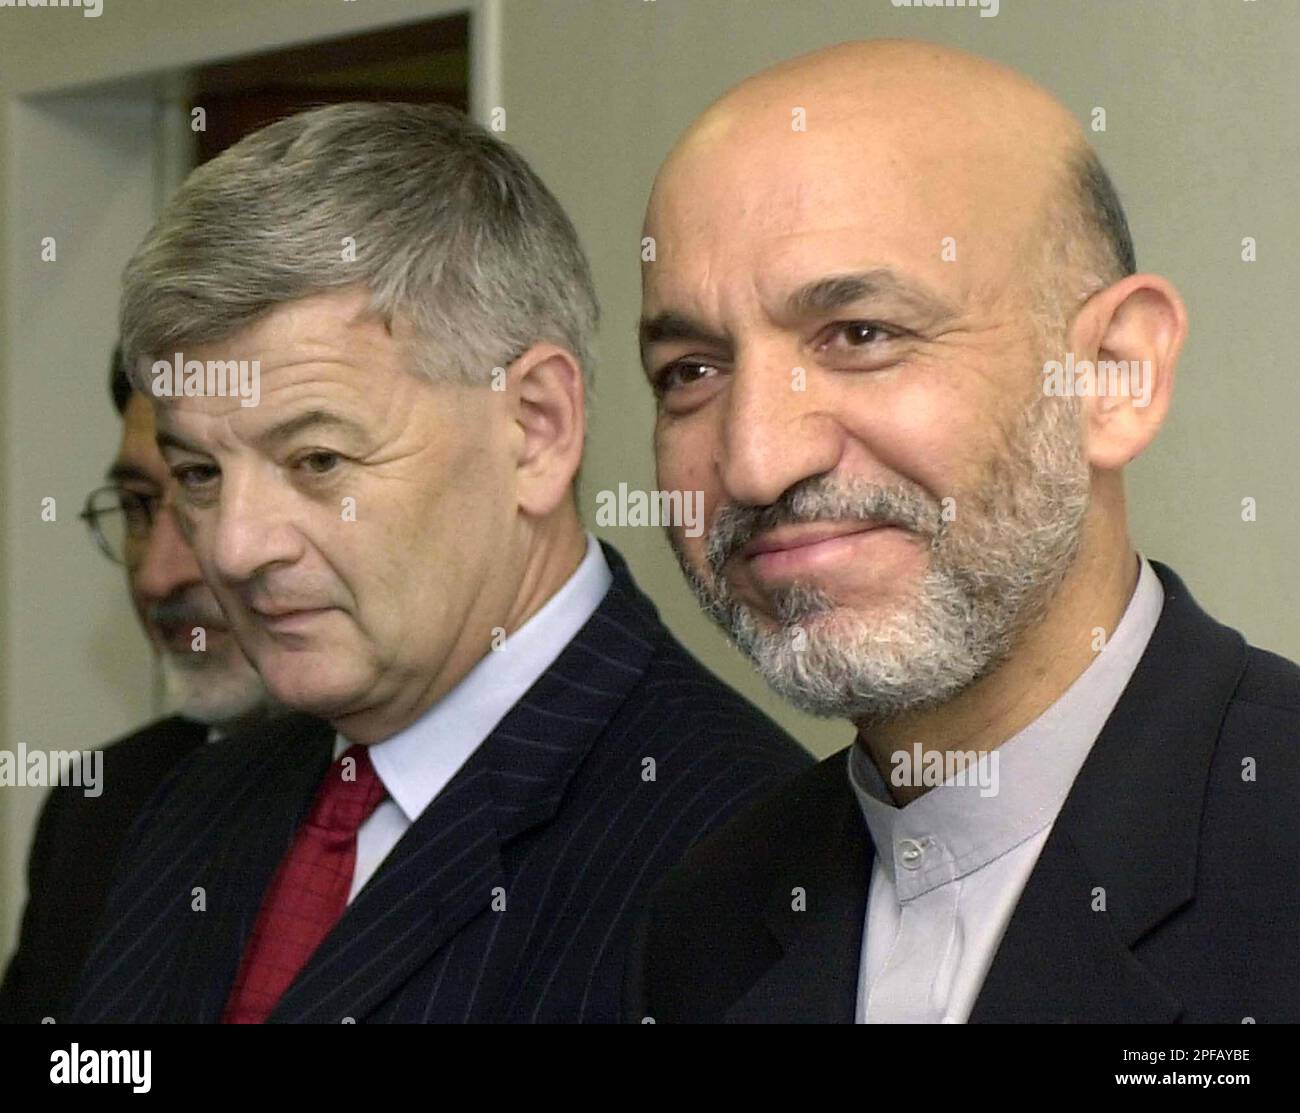 Afghan President Hamid Karzai, right, smiles after he was welcomed by German Foreign Minister Joschka Fischer, left, after he arrived at the U.S. Rhein Main Air Base, at the southern end of Frankfurt international airport, Germany, Sunday, Sept. 8, 2002. In his first trip since an attempt on his life three days ago, Karzai stopped over in Germany on his way to the United States where he will attend the U.N. General Assembly debate and ceremonies marking the anniversary of the Sept. 11 terrorist attacks. (AP Photo/Pool/Oliver Berg) Stock Photo